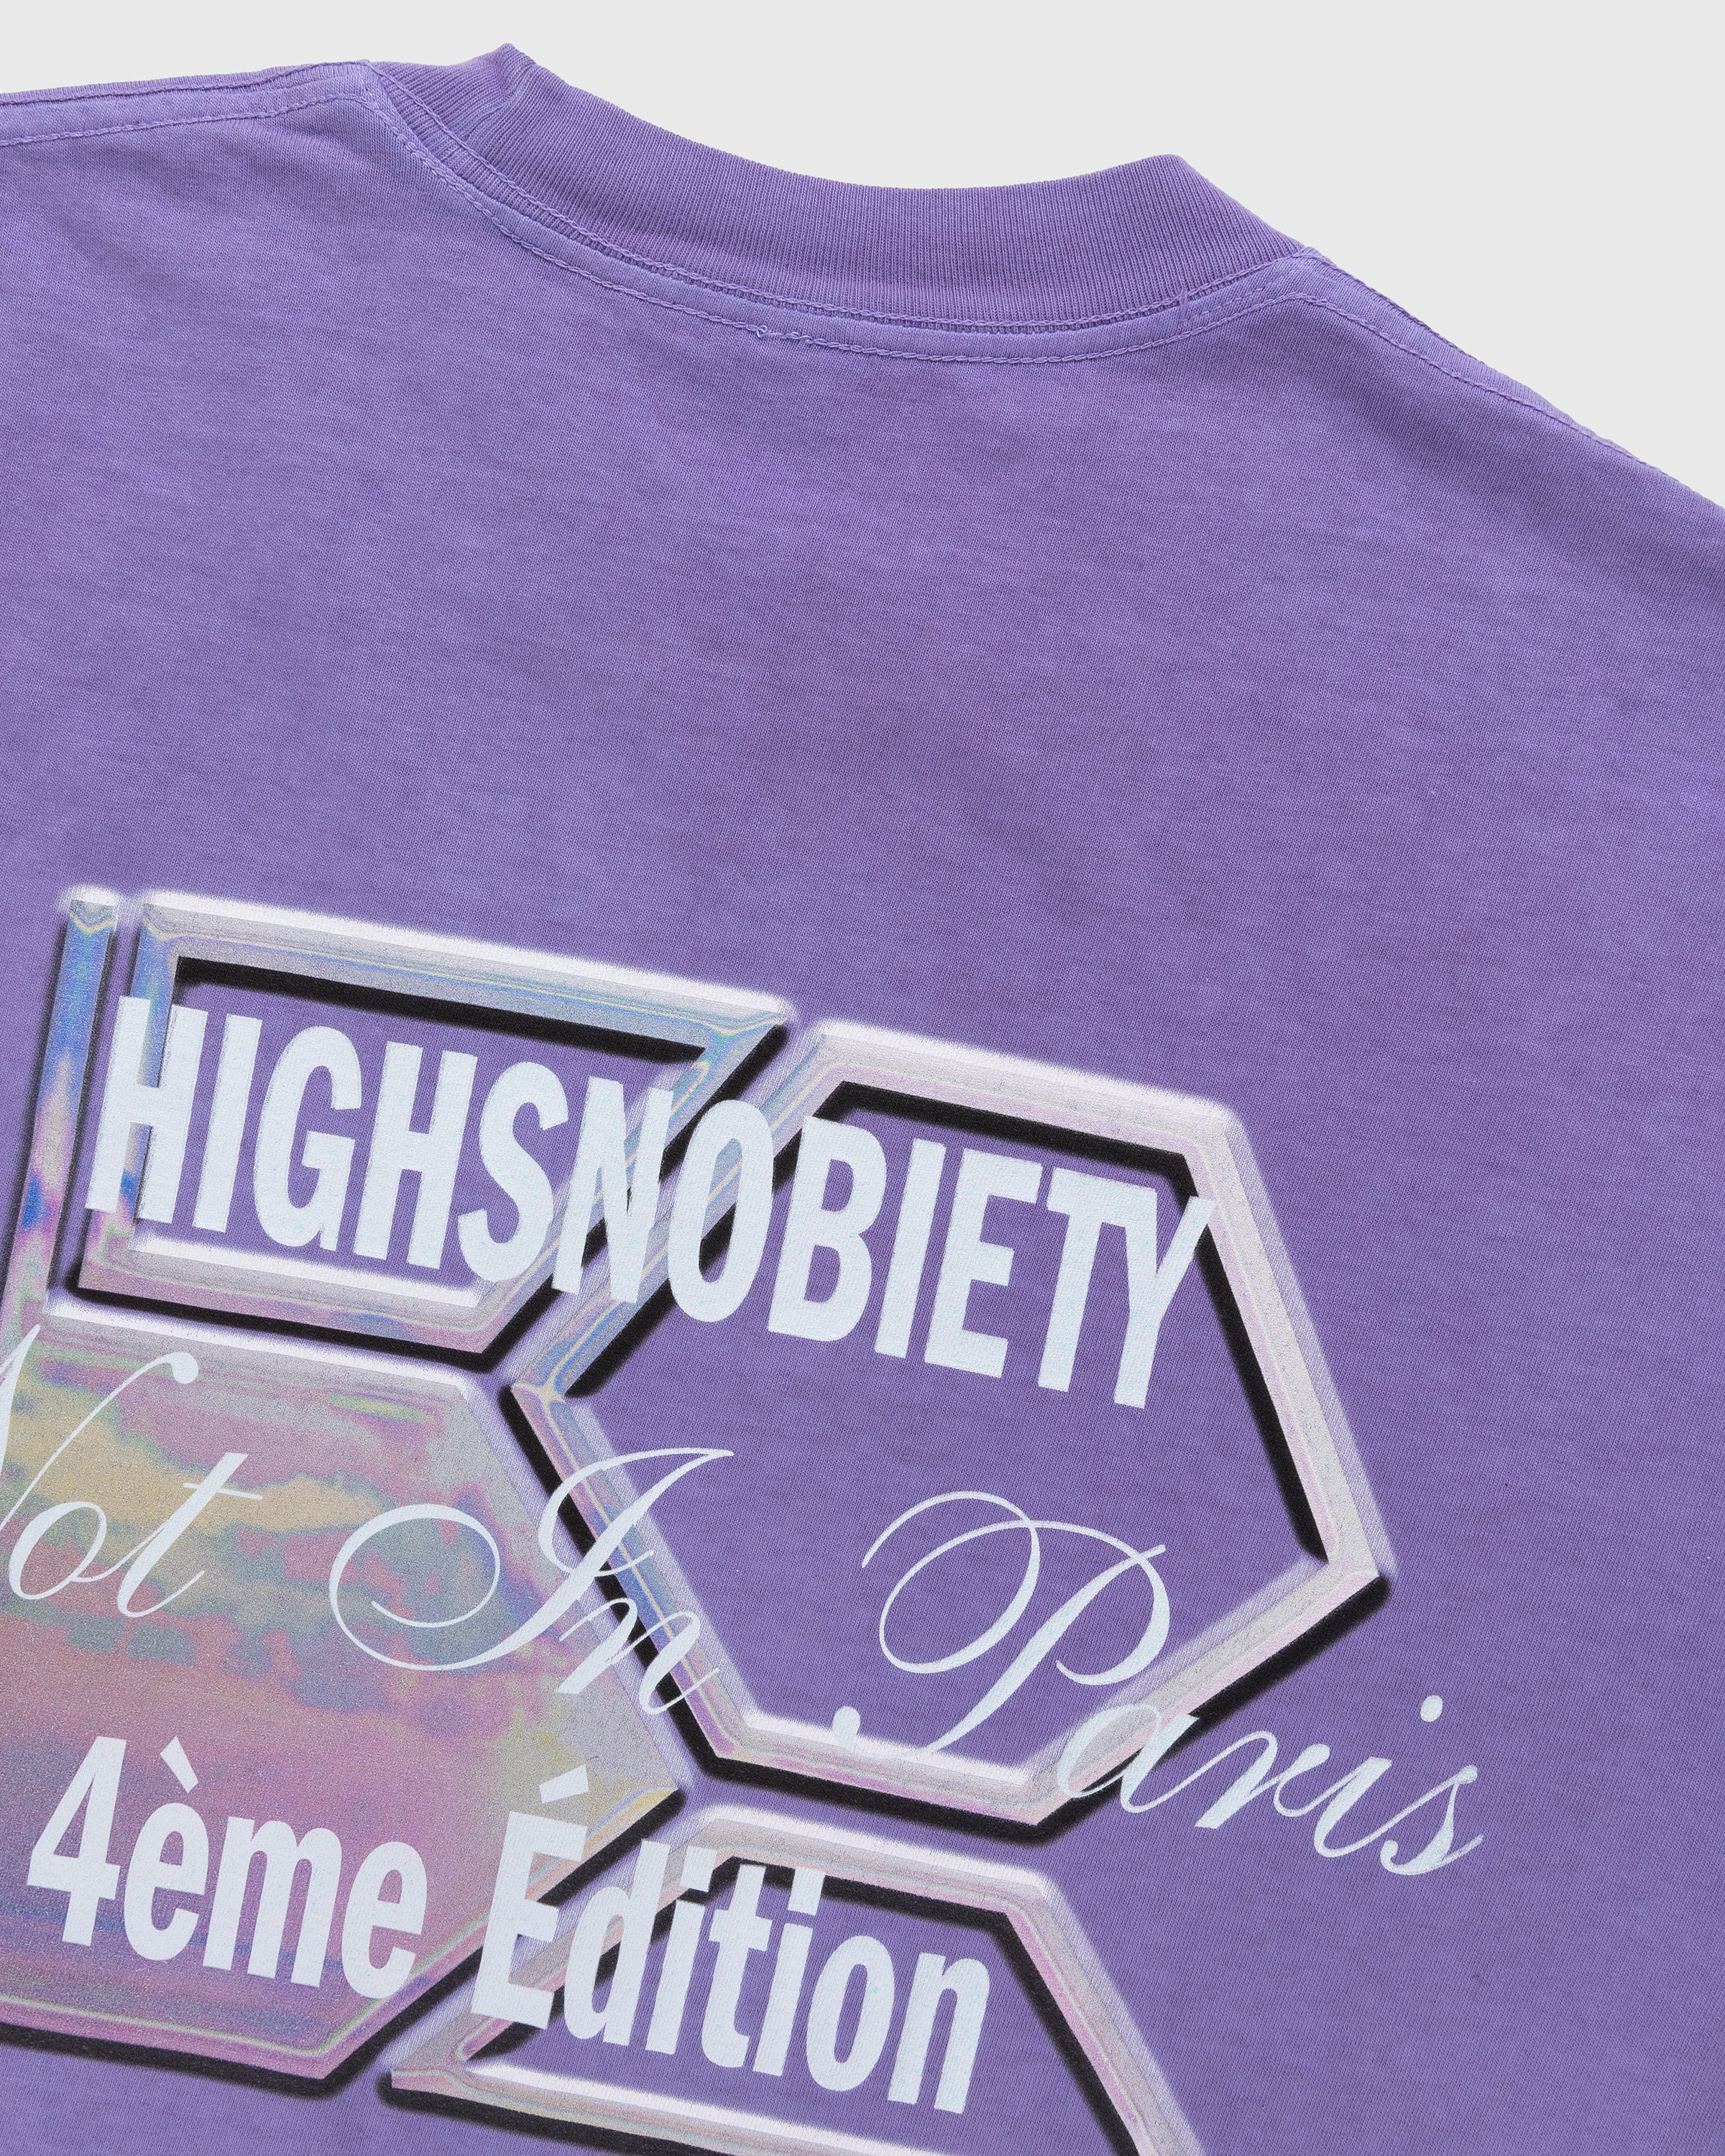 Bstroy x Highsnobiety - Not In Paris 4 Flower T-Shirt Lavender - Clothing - Purple - Image 5